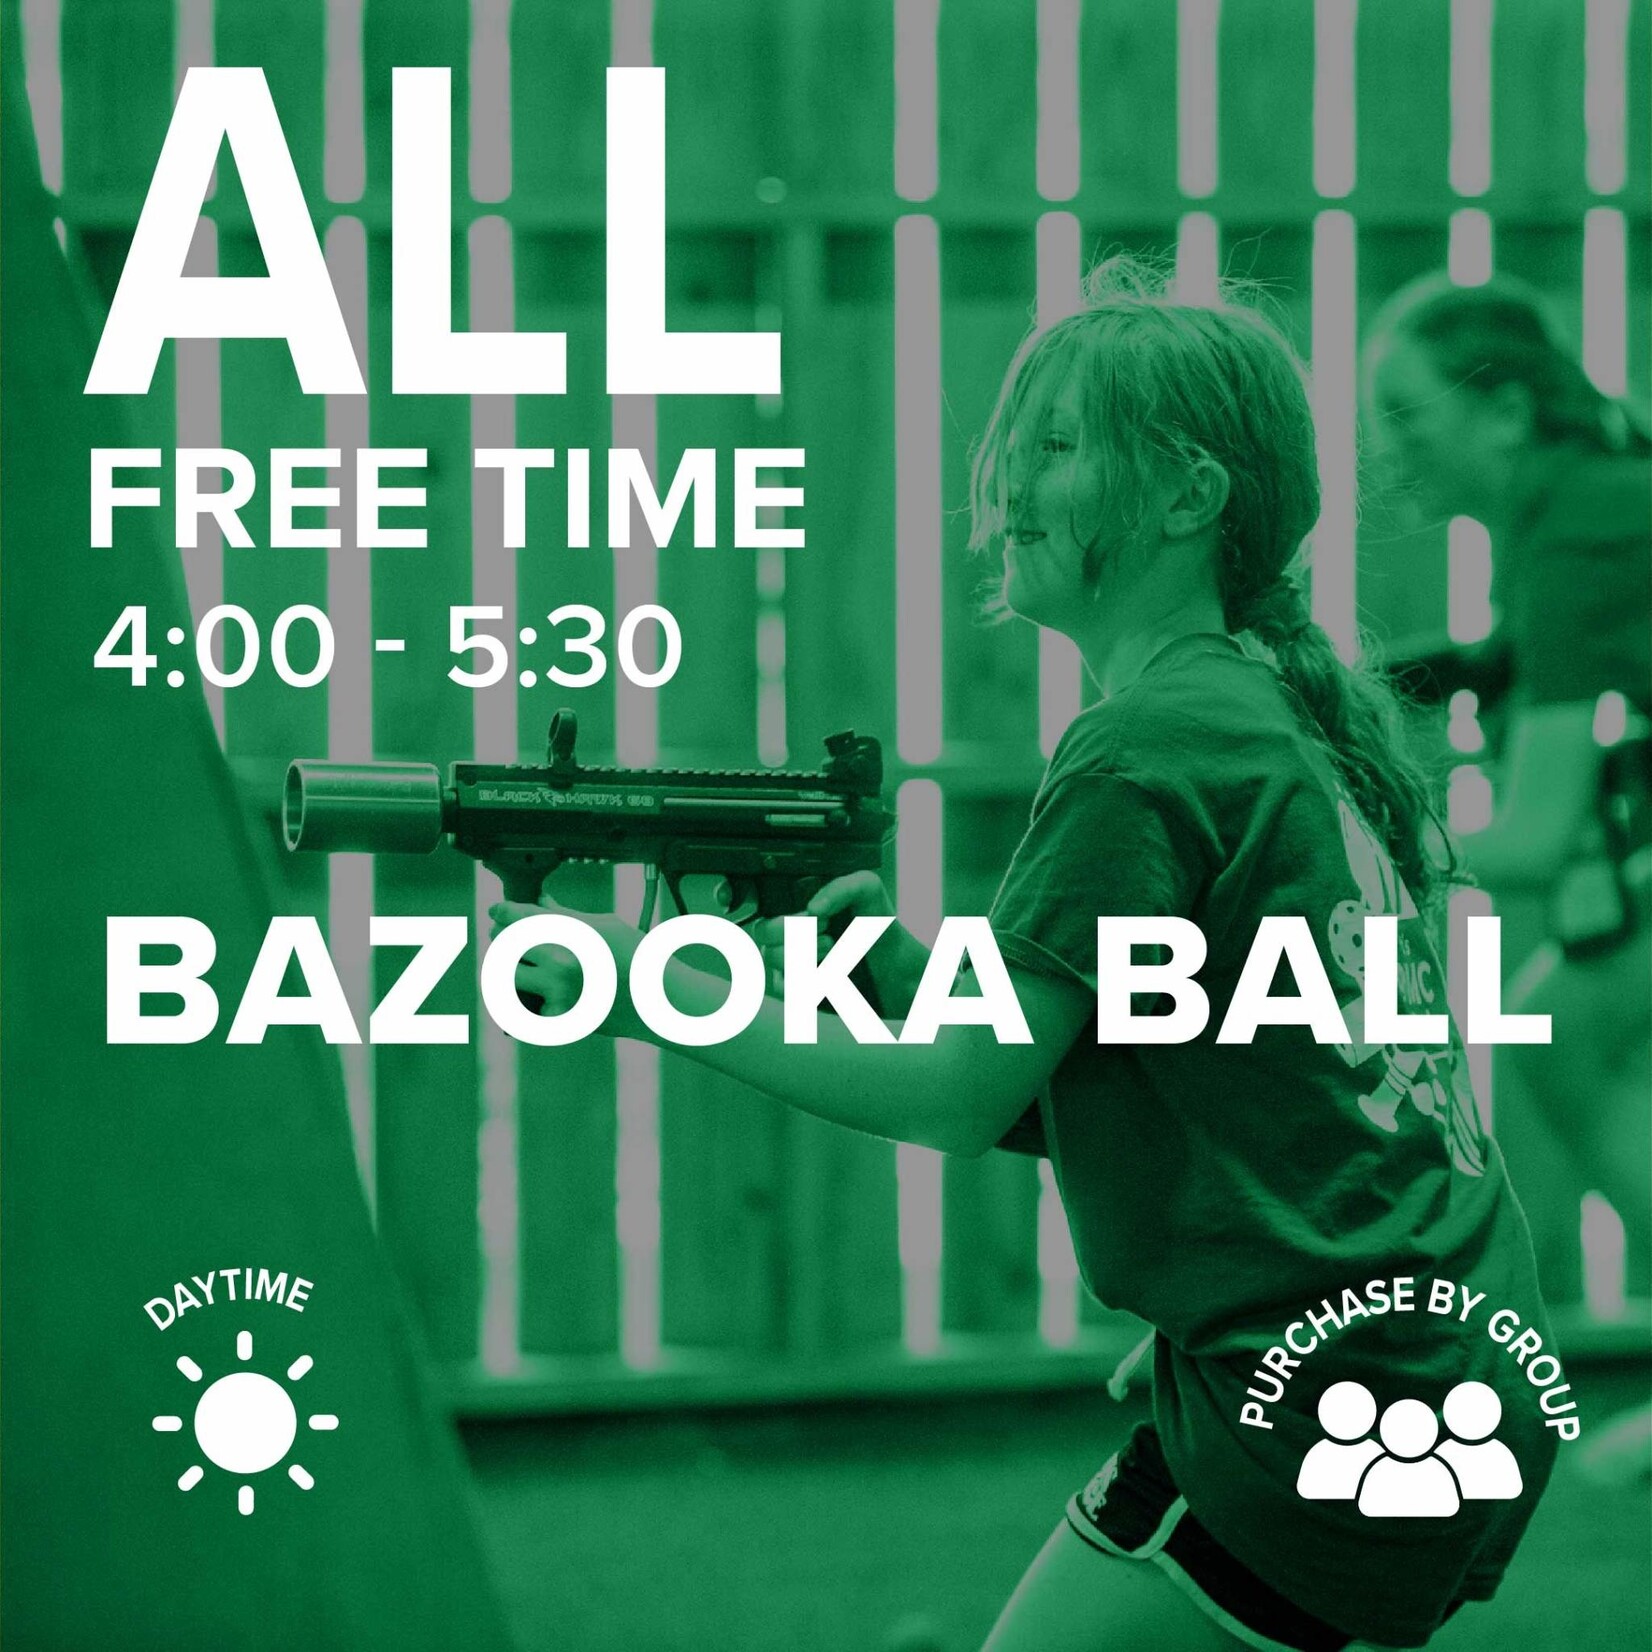 2024 Student Life Youth Camp 2 June 3-June 7 Bazooka Ball SLY2 2024 DAYTIME ALL